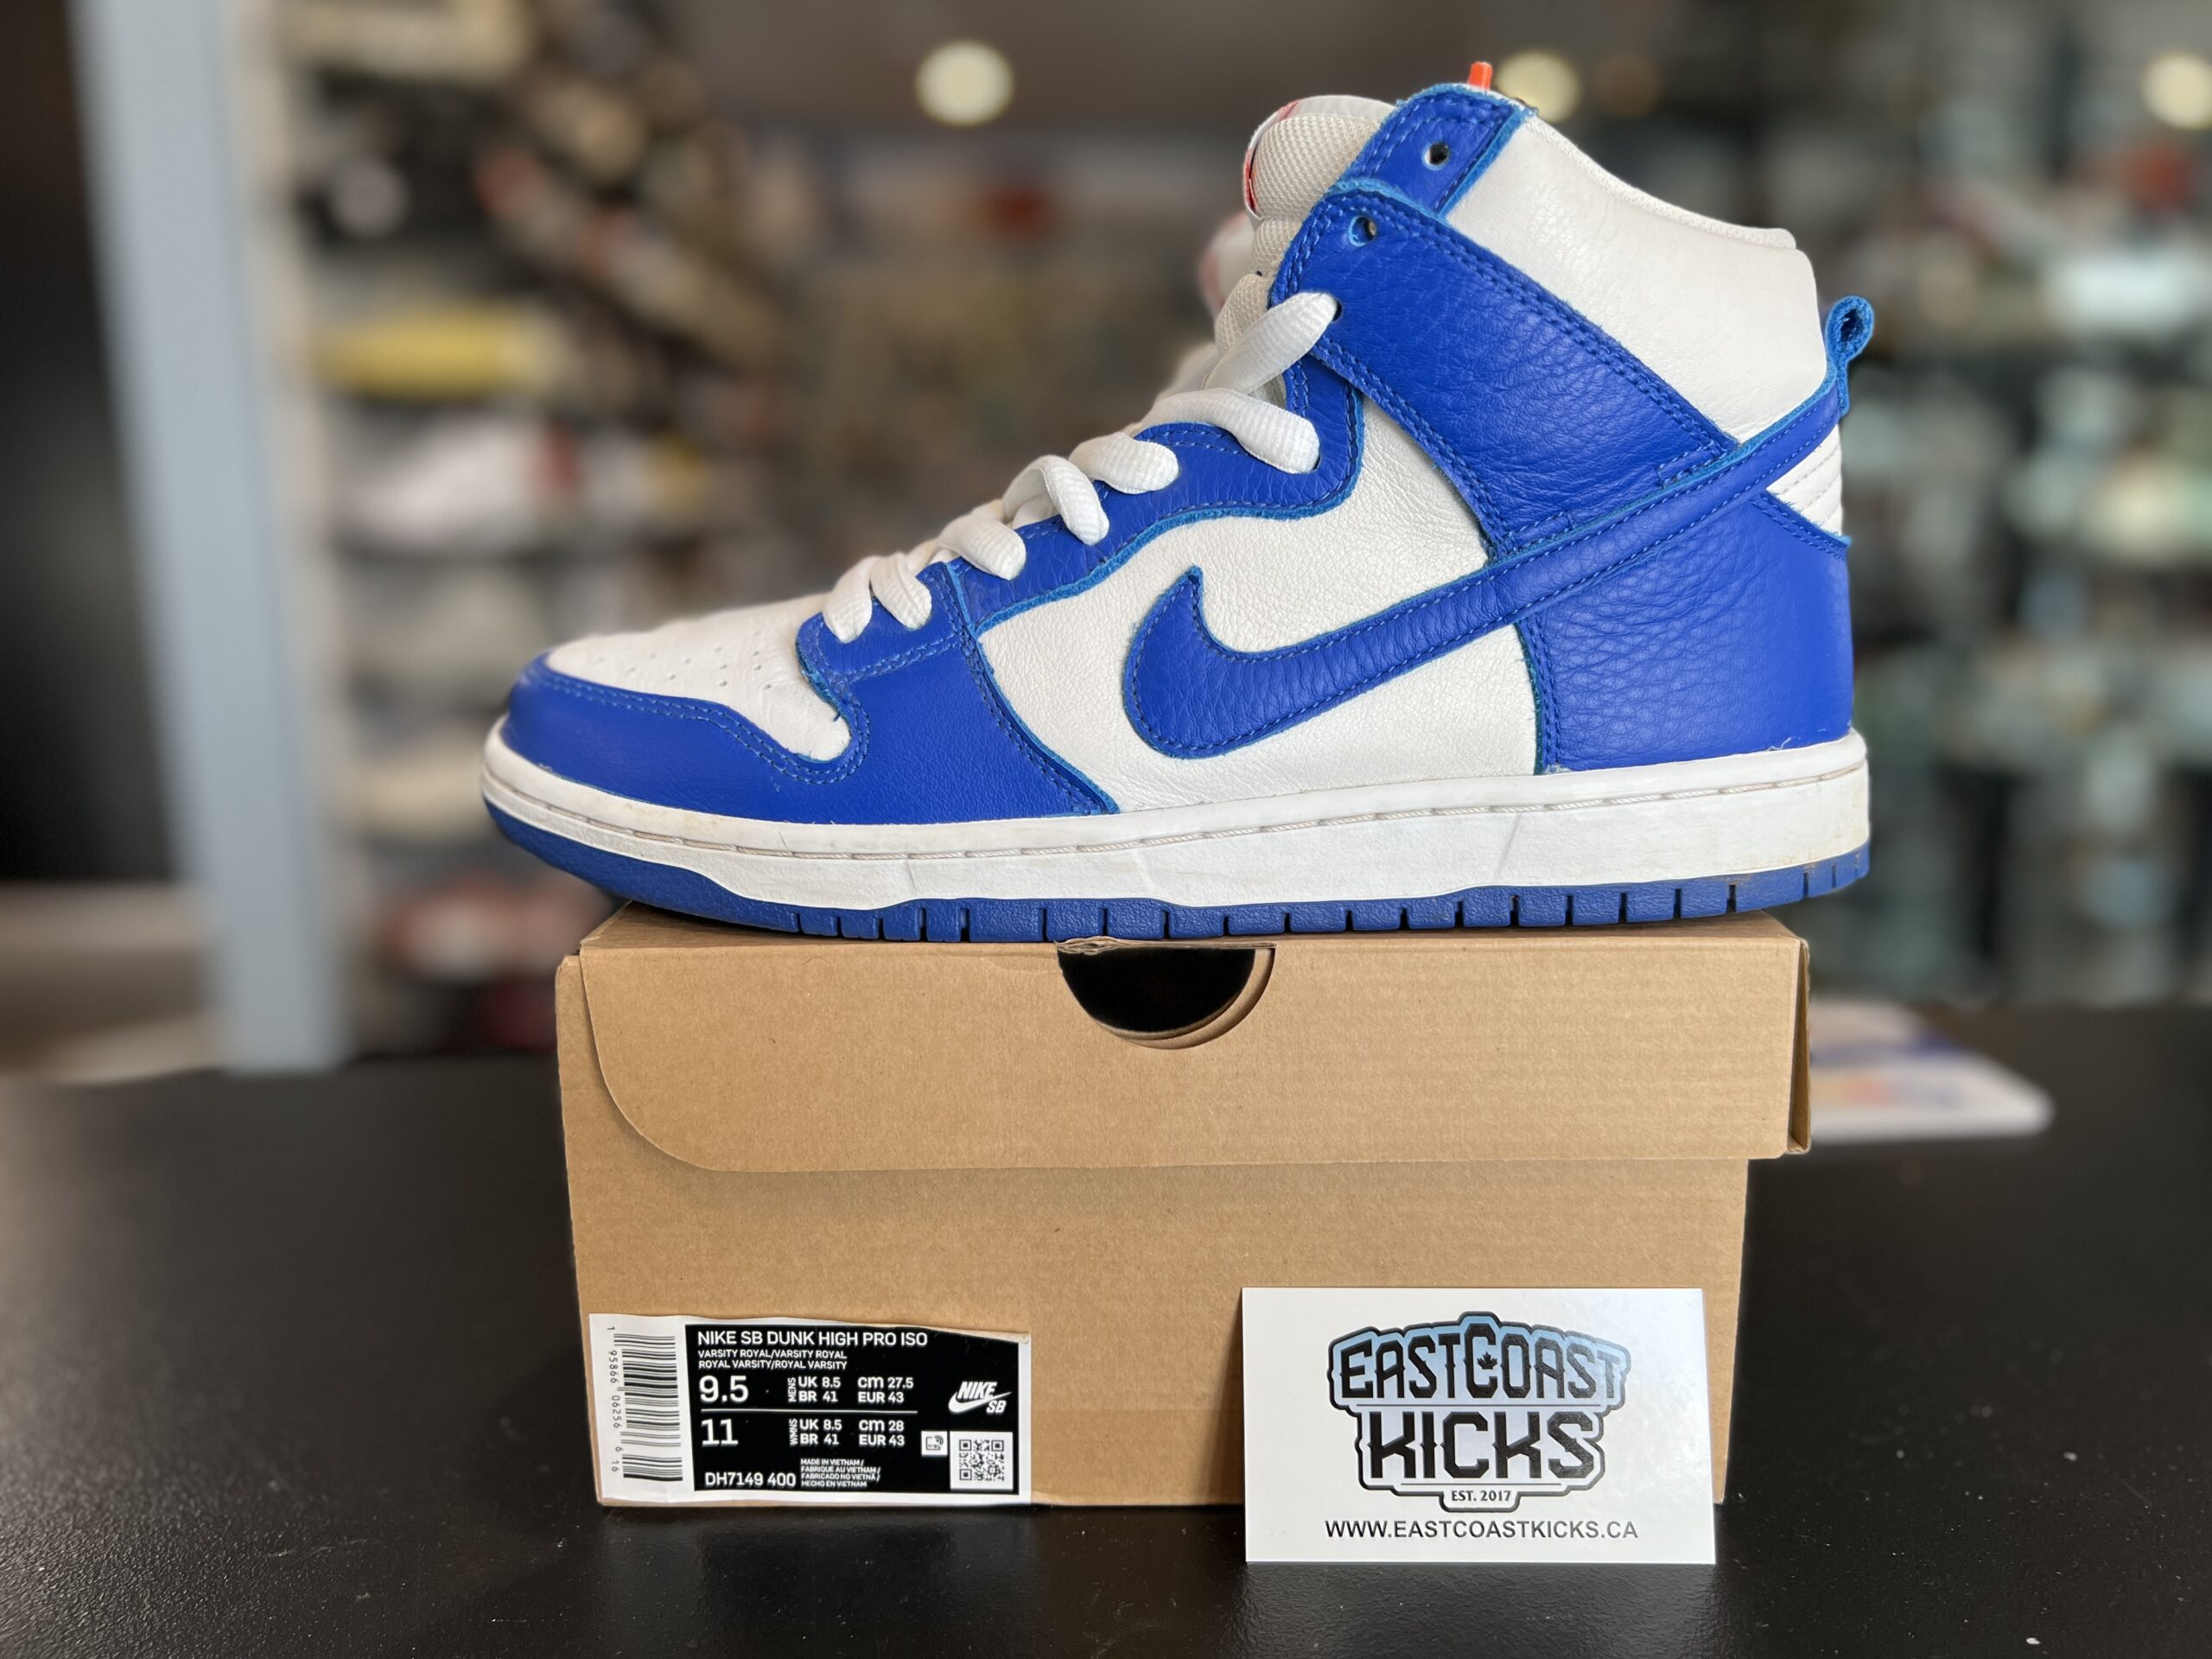 Preowned Nike SB Dunk High Pro ISO Kentucky Size 9.5